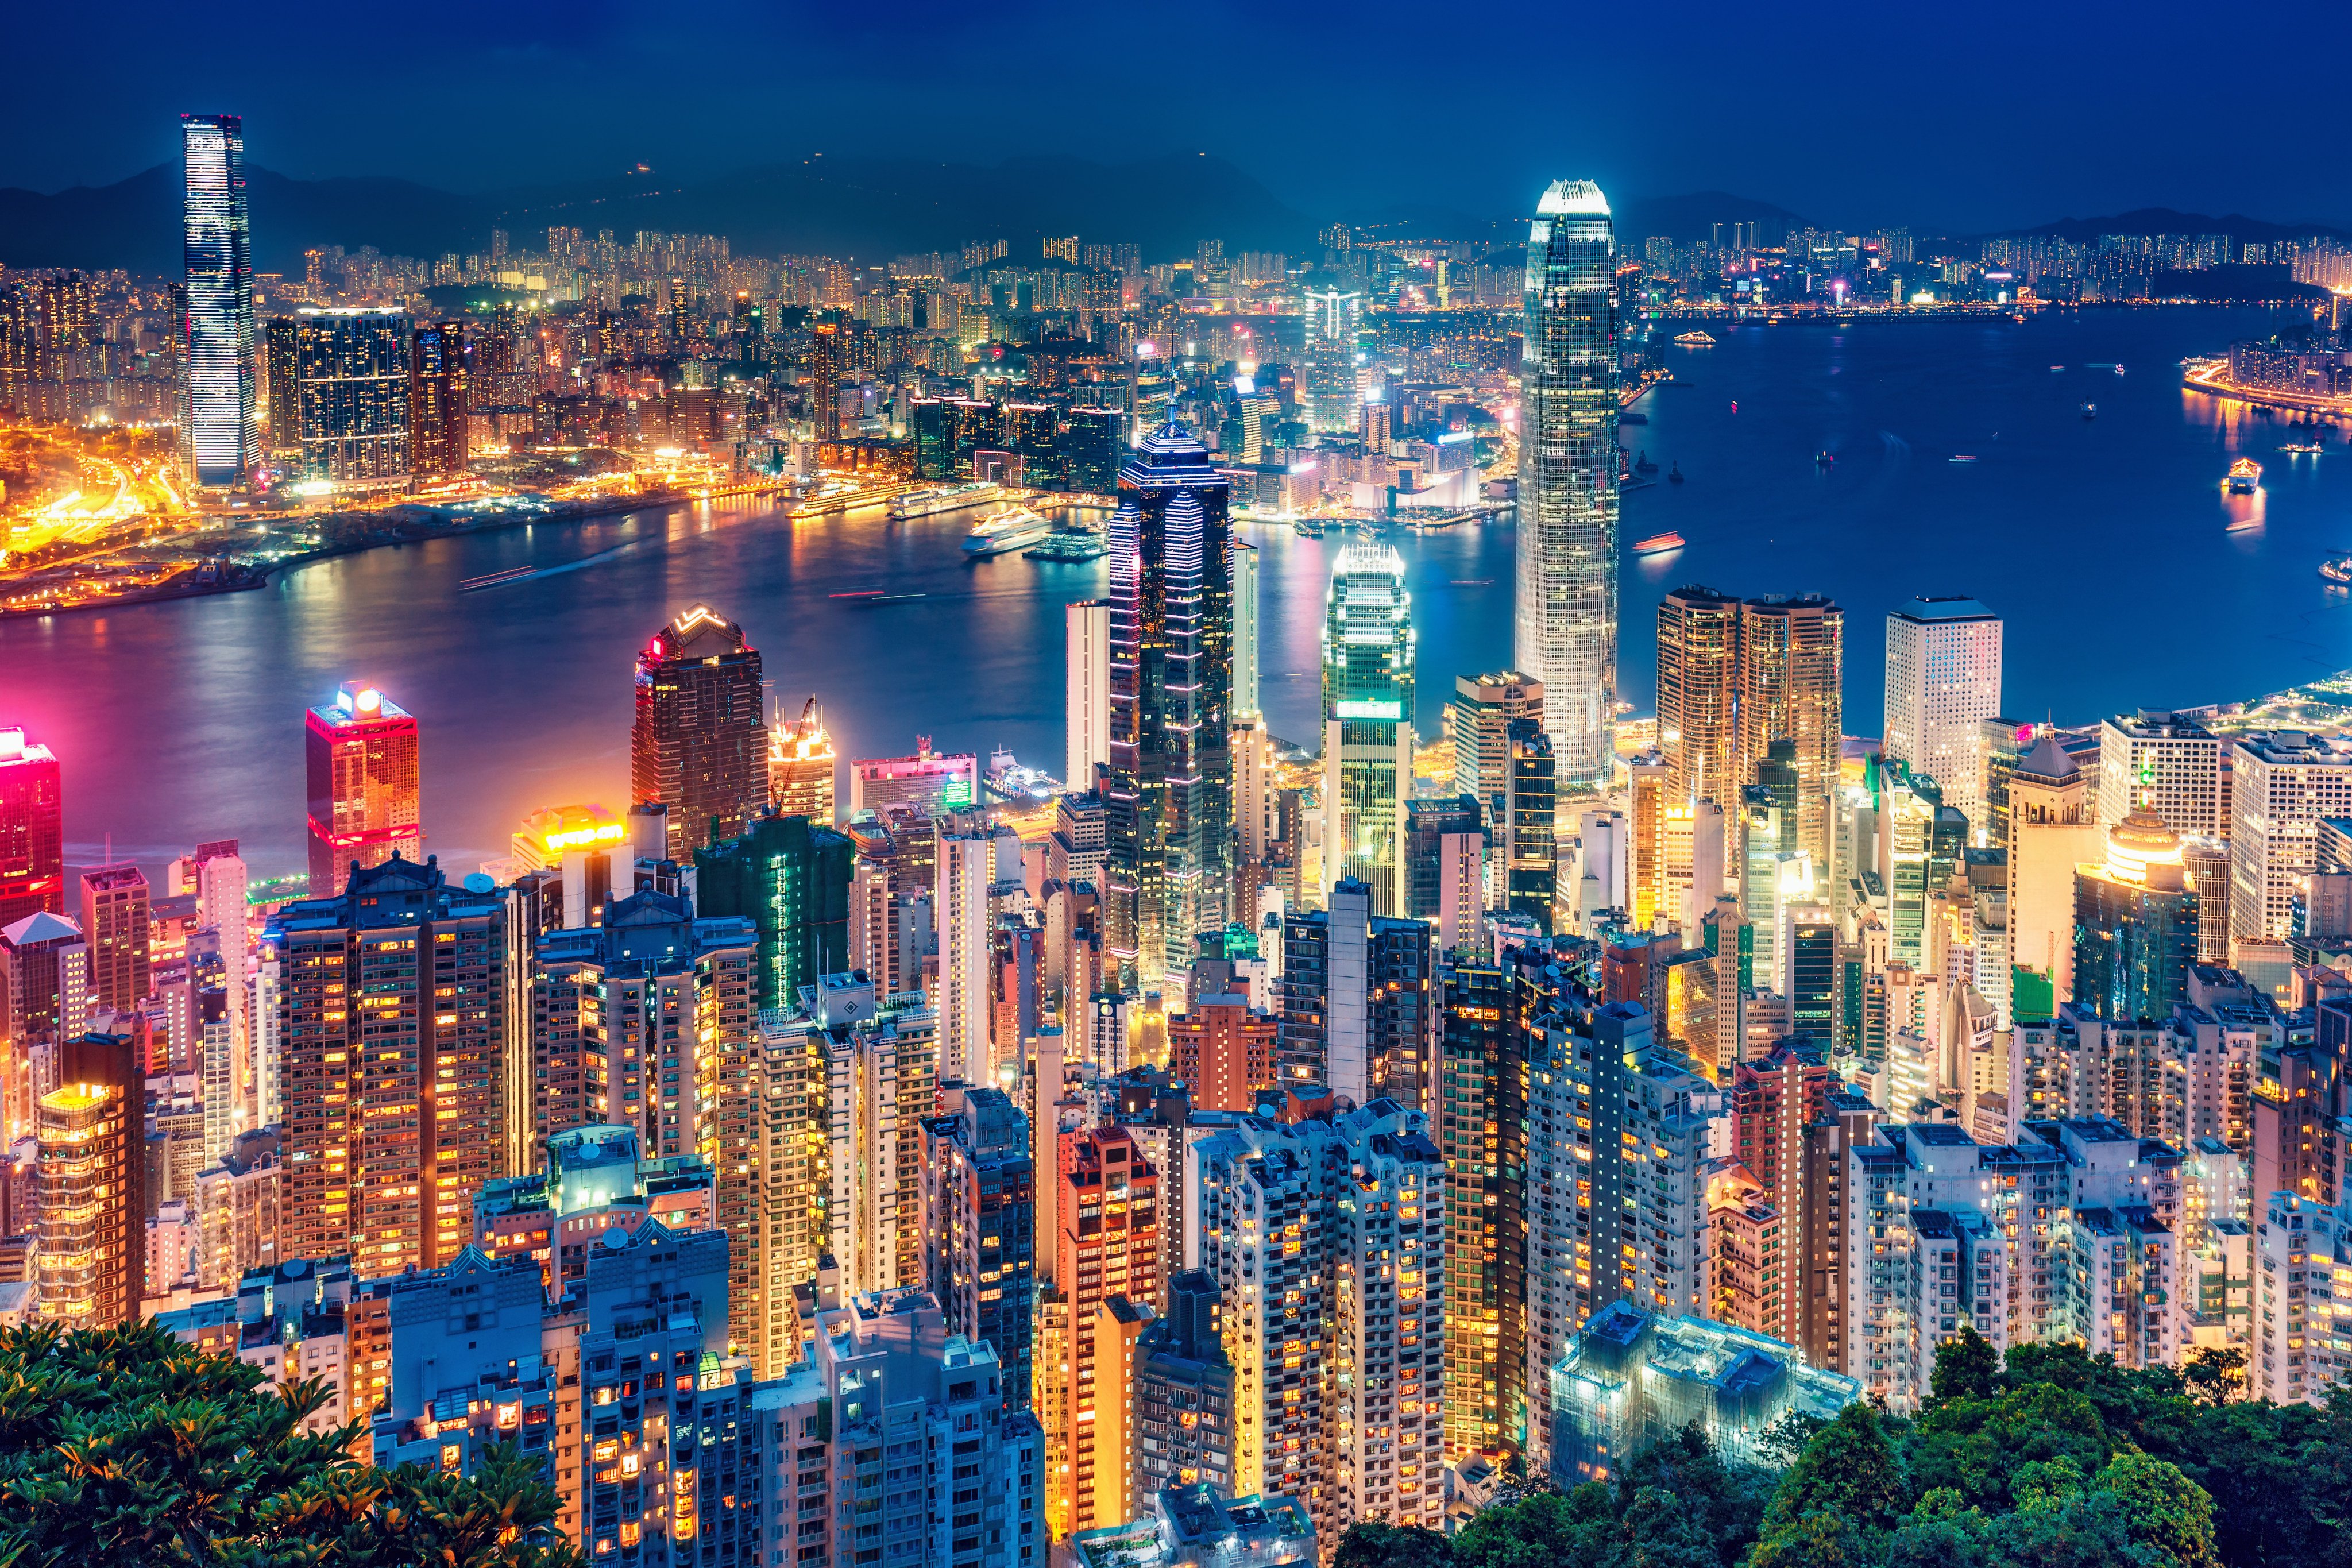 Hong Kong skyline at night from Victoria Peak. Photo: Getty Images